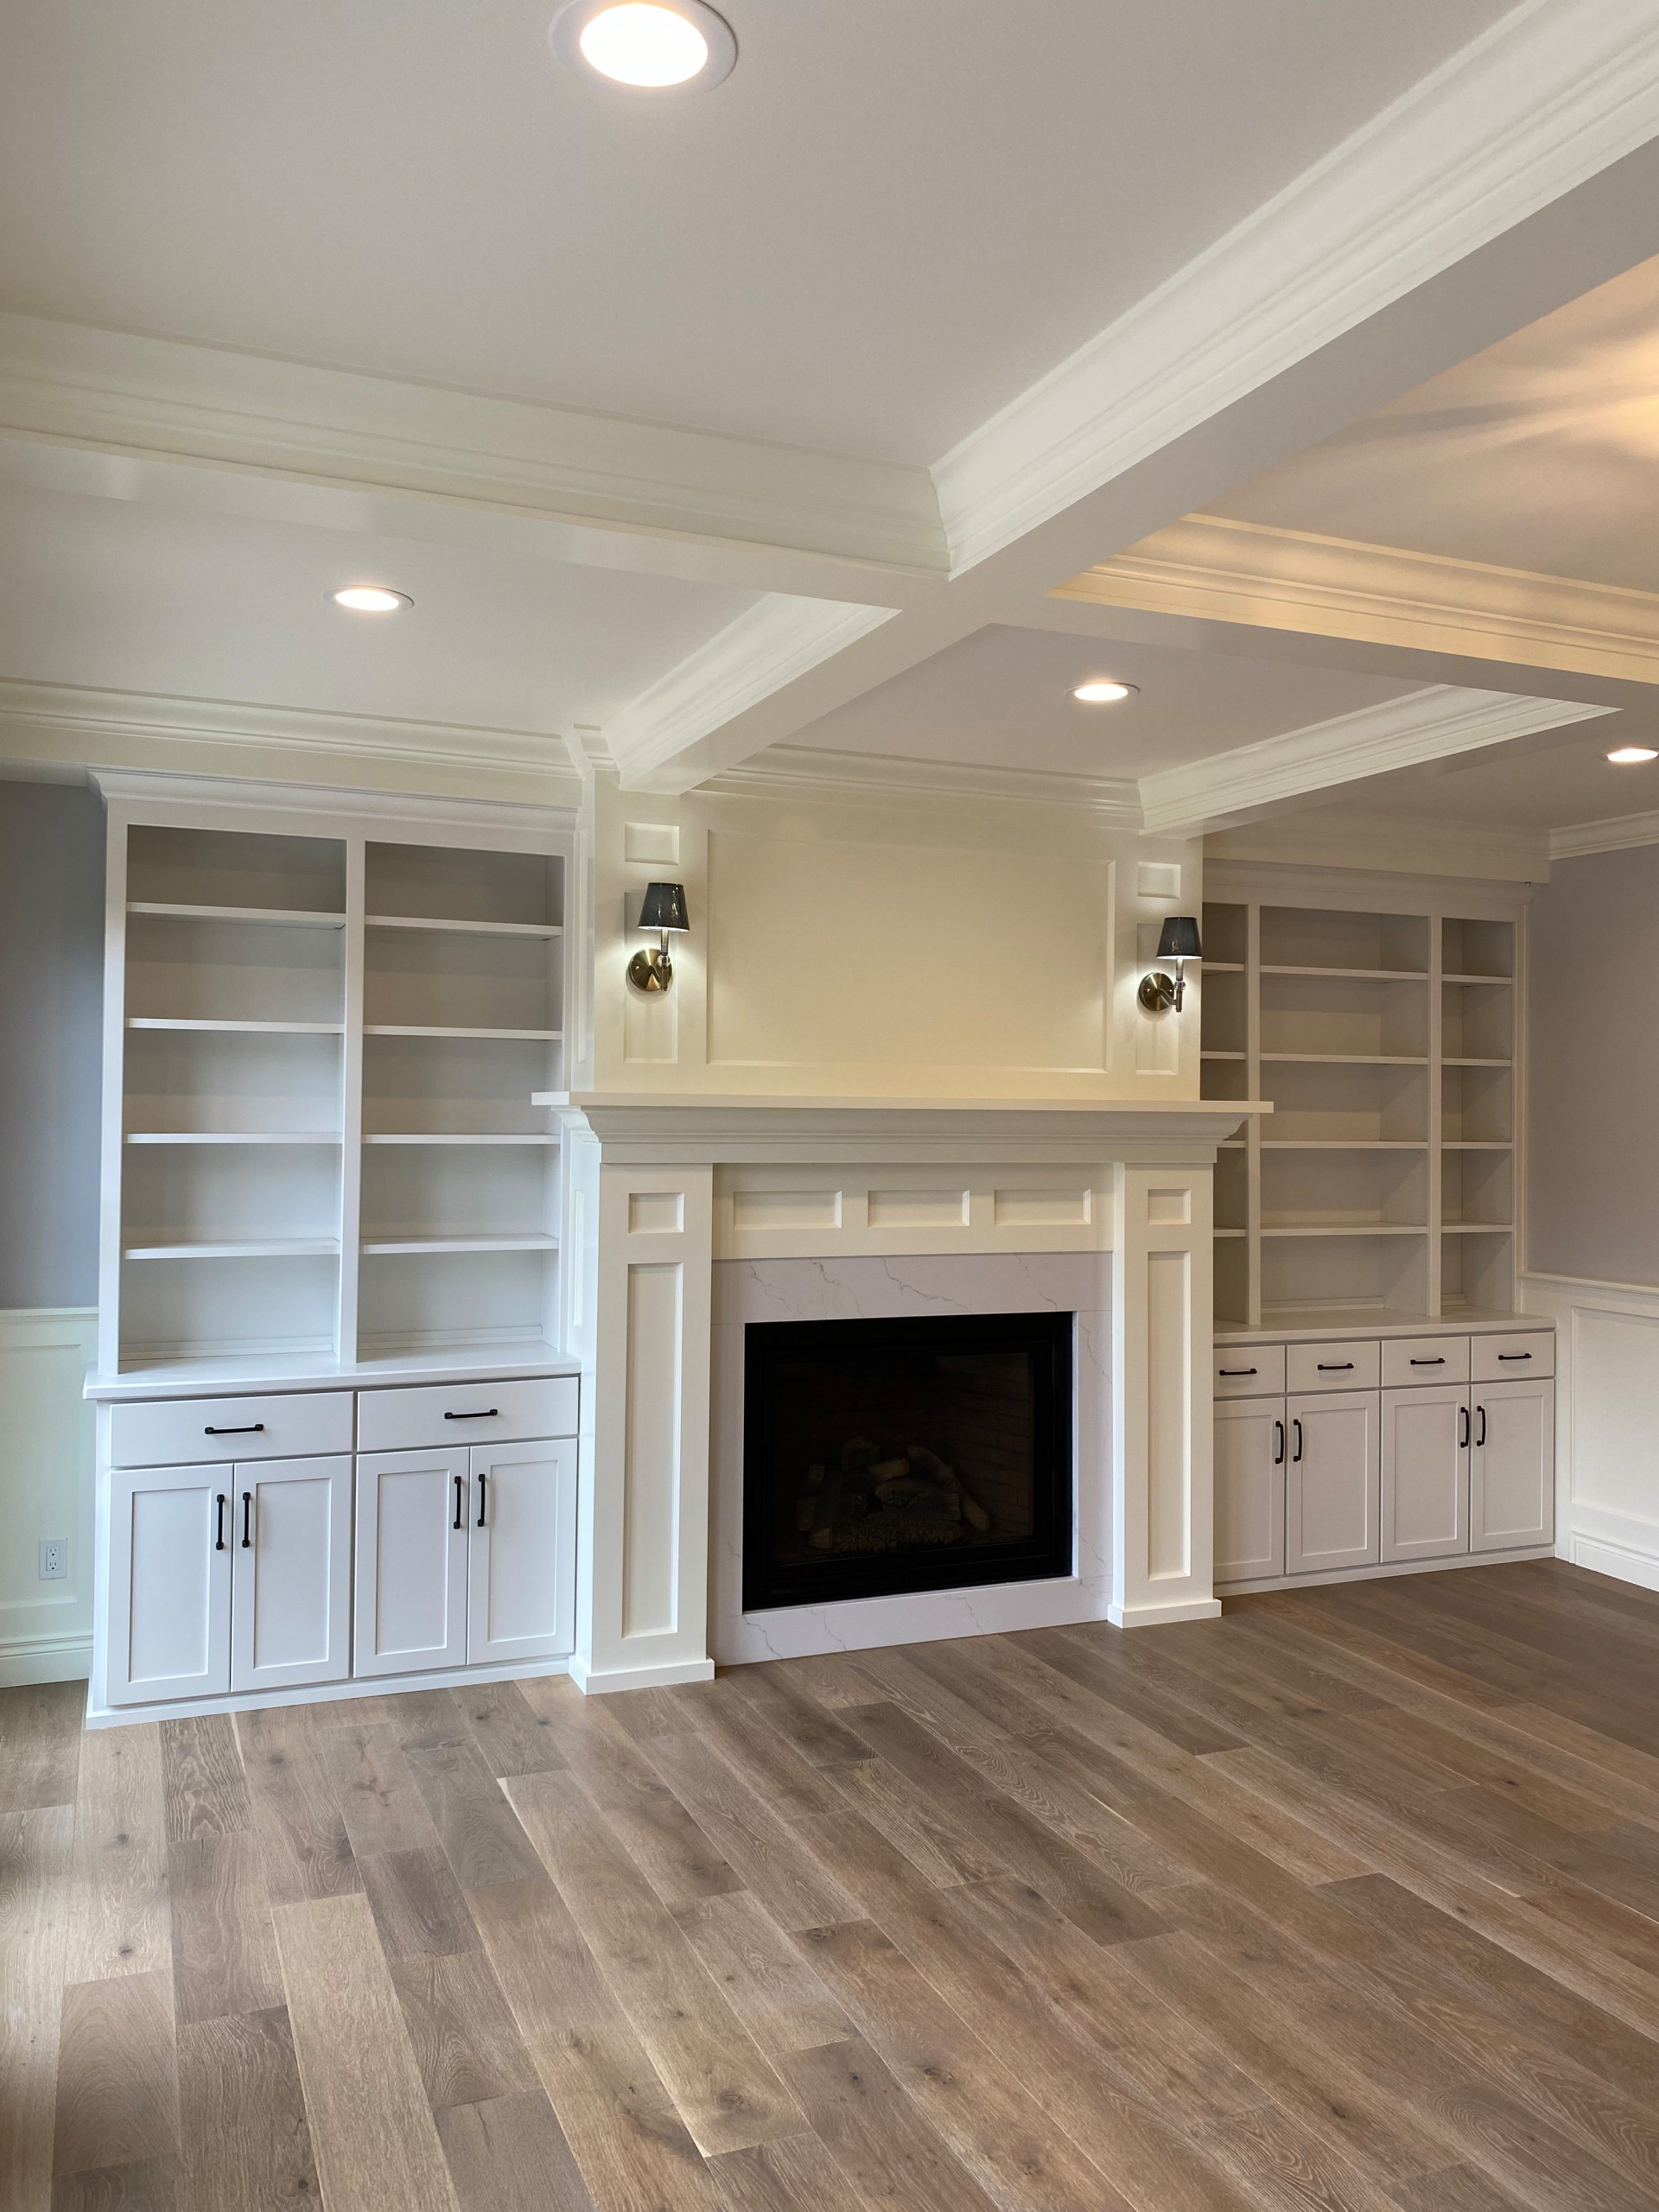 Gas log fireplace with painted custom built-ins and coffered ceiling